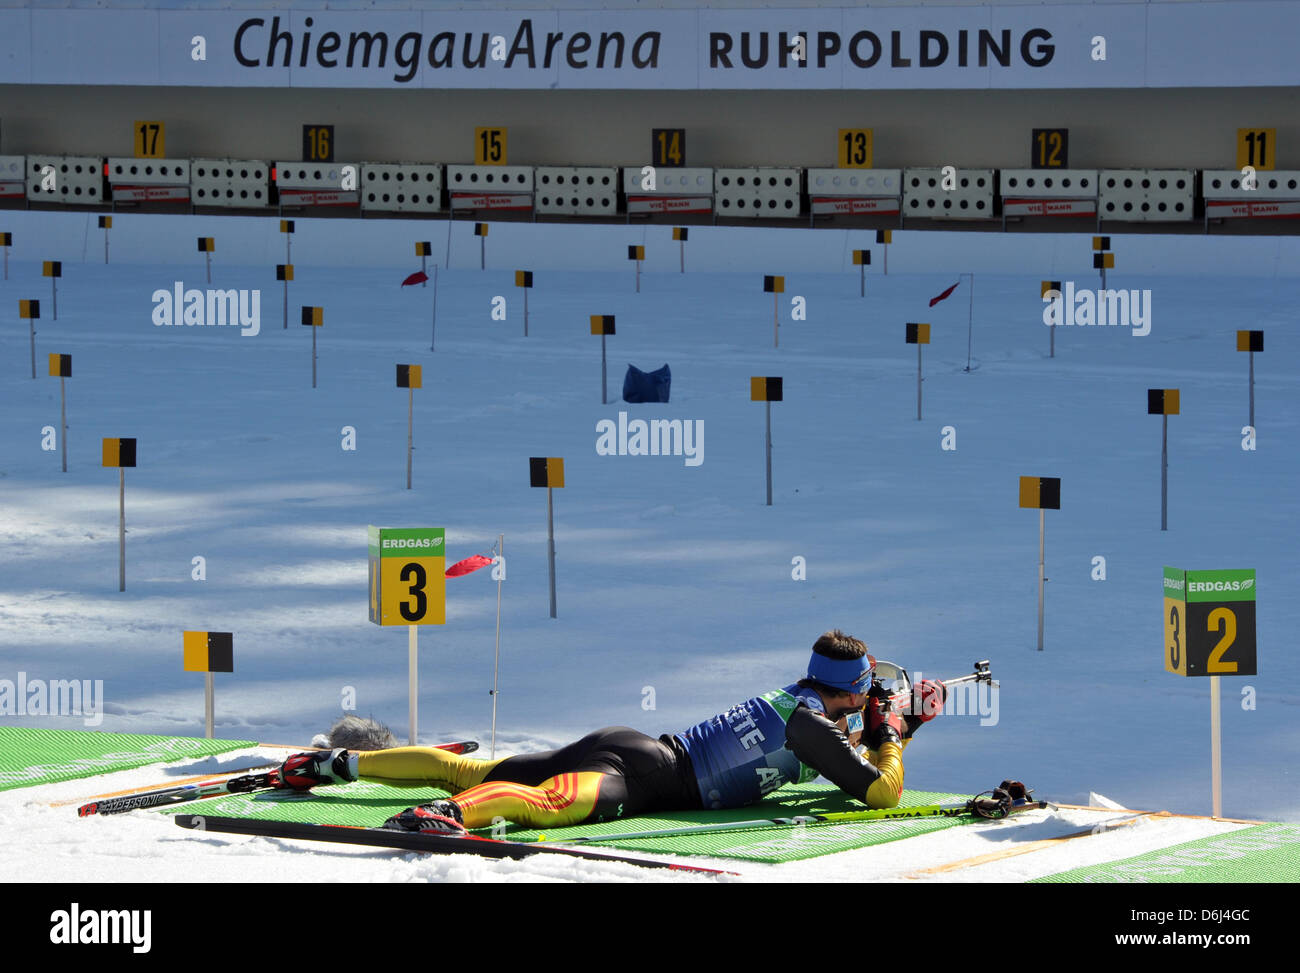 German biathlete Michael Greis is pictured during a training session of the Men's Biathlon World Championships at Chiemgau Arena in Ruhpolding, Germany, 02 March 2012. Photo: PETER KNEFFEL Stock Photo